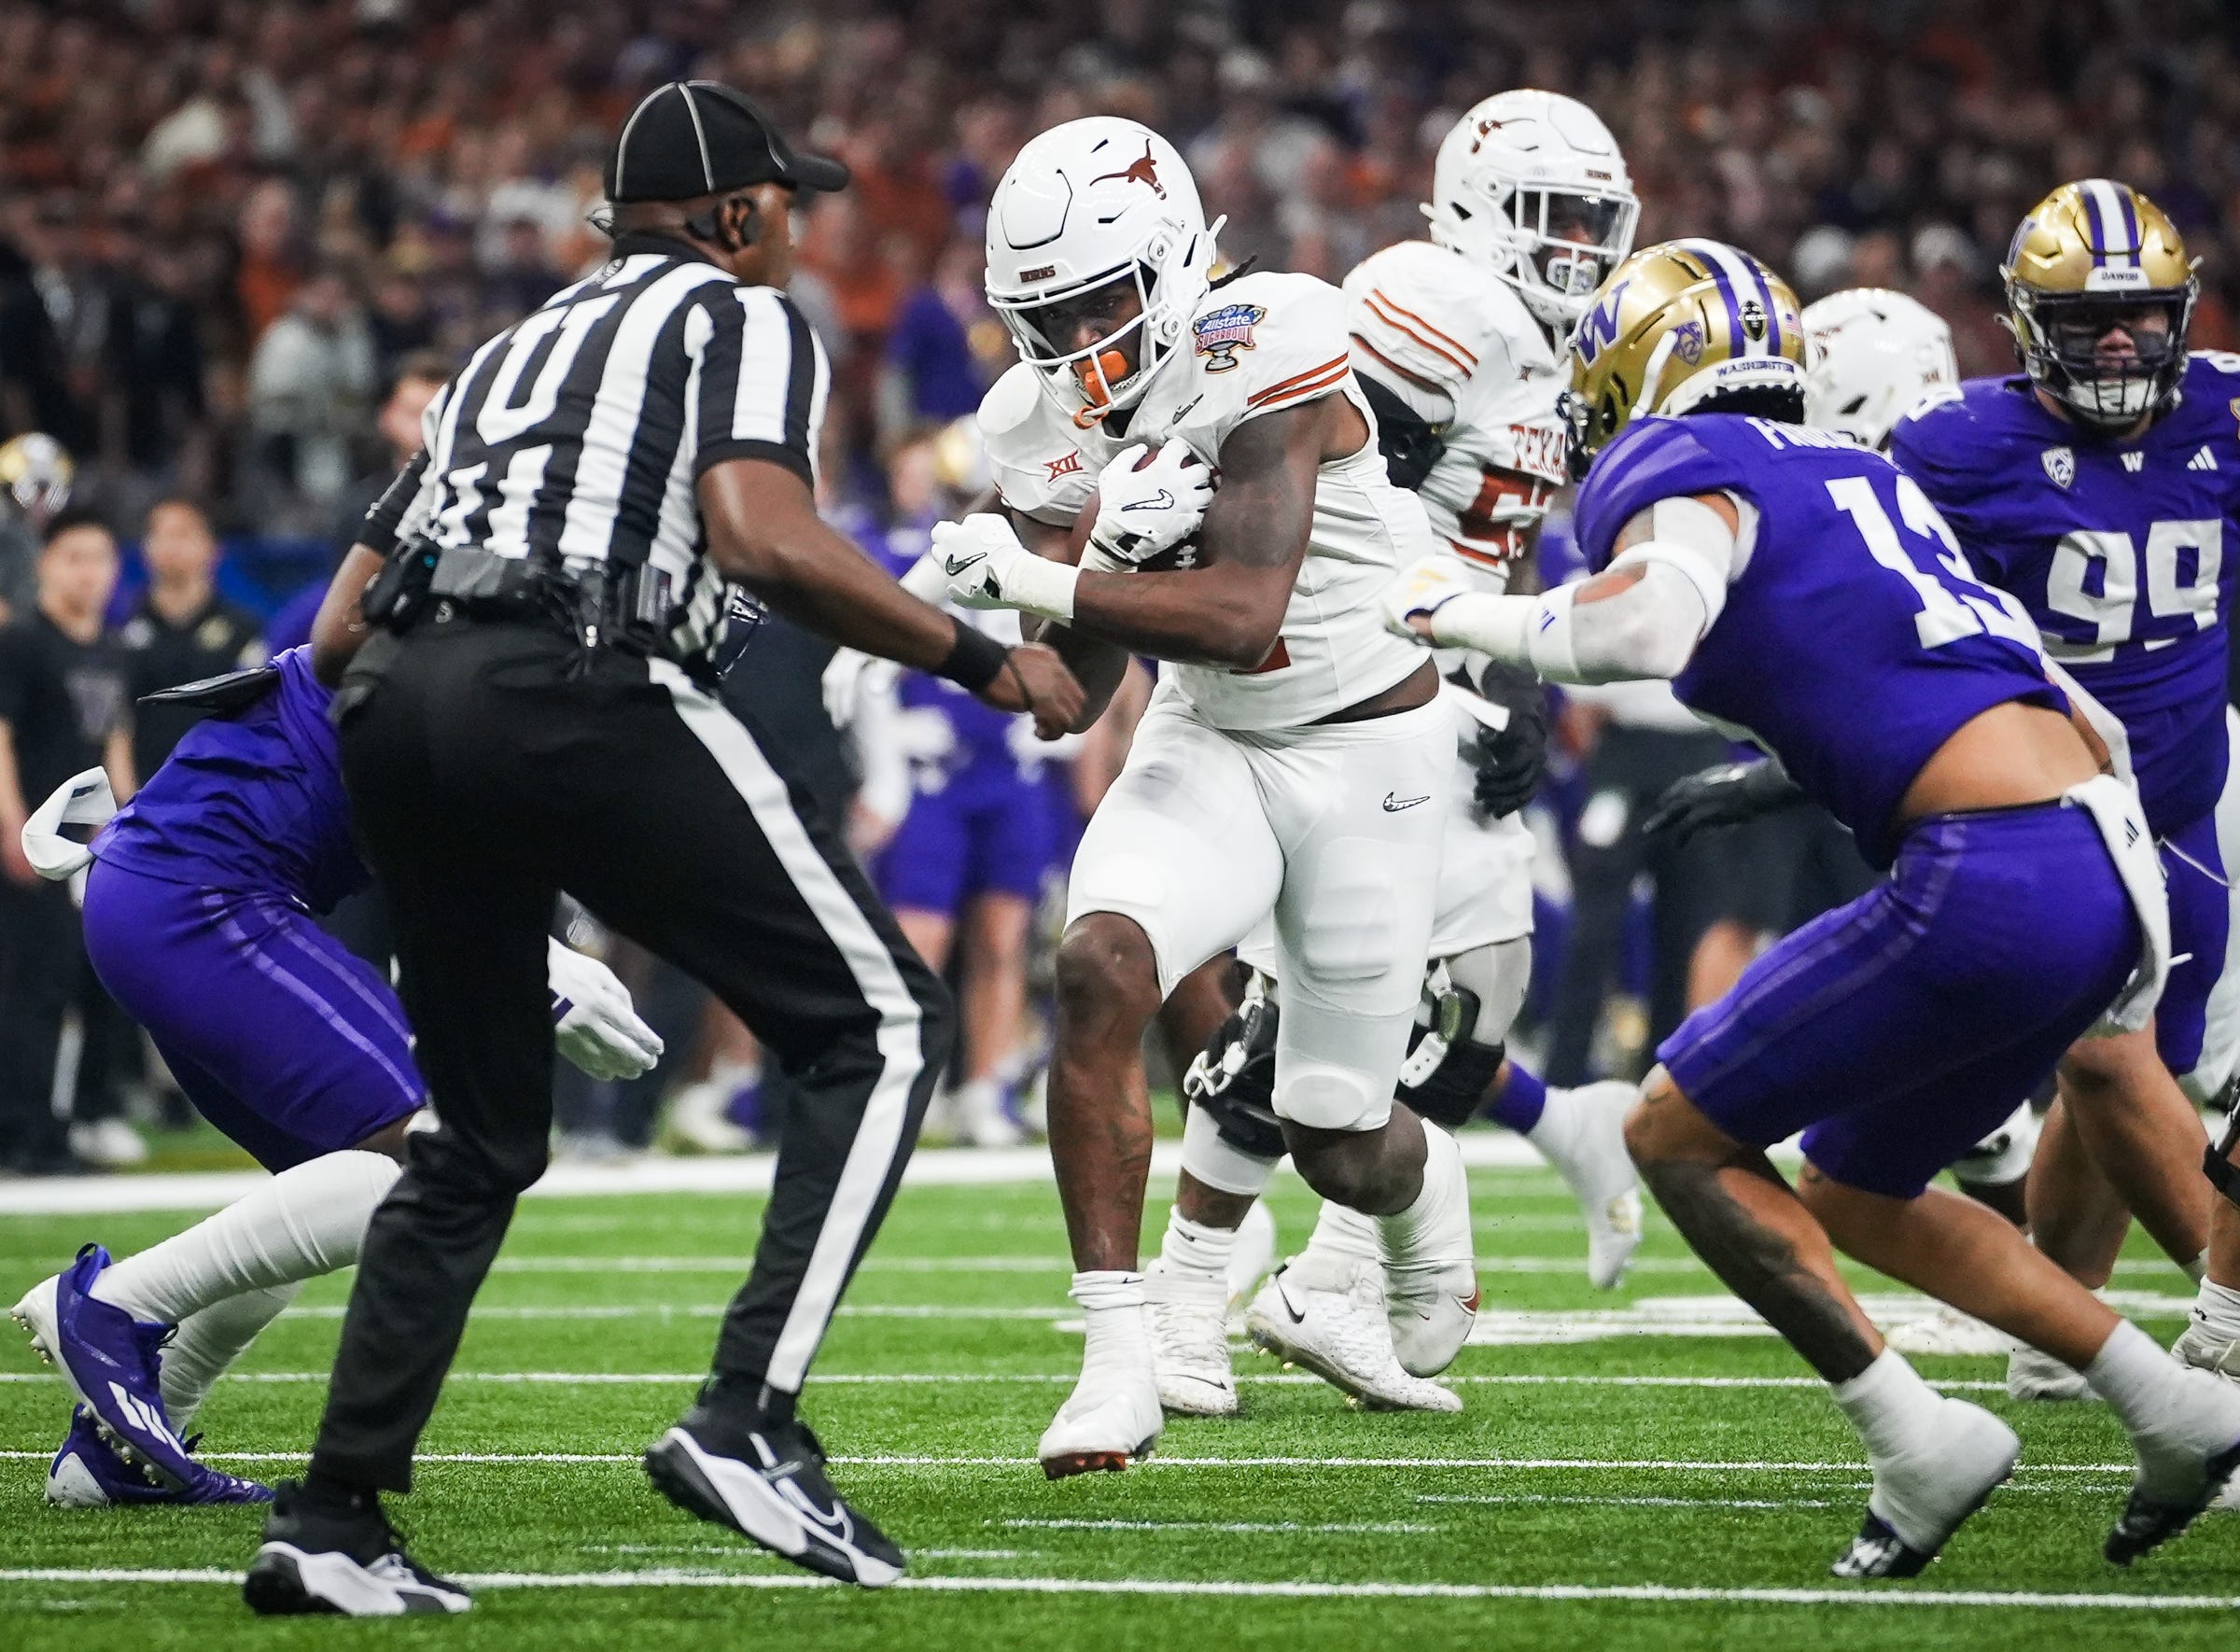 Texas Longhorns running back CJ Baxter (4) carries the ball through the Washington Huskies defense in the second quarter of the Sugar Bowl College Football Playoff semi-finals at the Ceasars Superdome in New Orleans, Louisiana, Jan. 1, 2024. The Texas Longhorns take on the Washington Huskies for a spot in the College Football Playoff Finals.